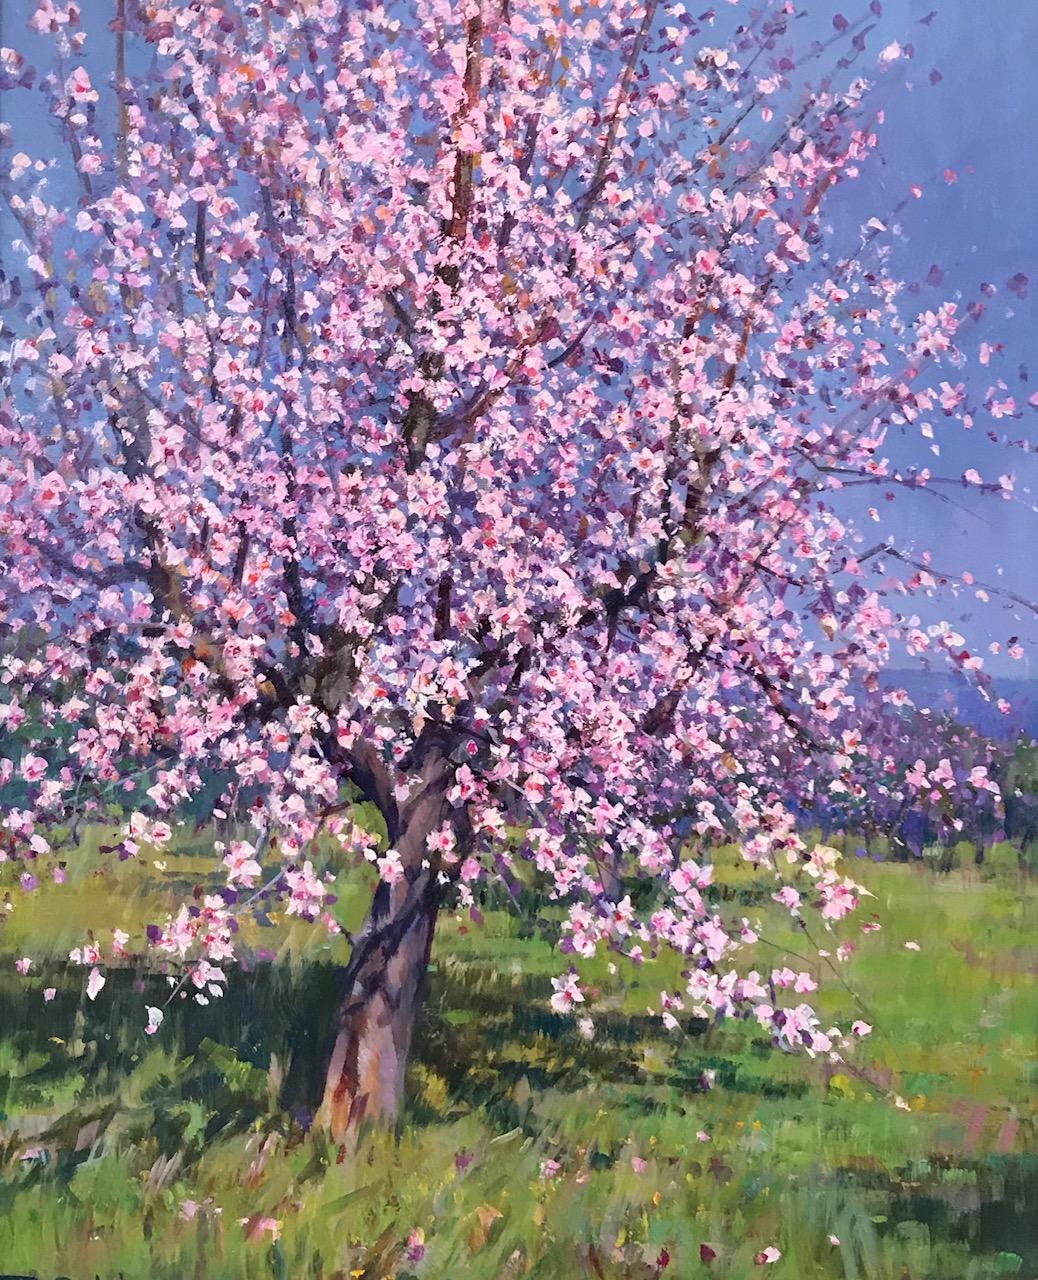 Francisco Calabuig Landscape Painting - Contemporary Rural Pink Landscape painting of a Almond tree 'Blossom' byCalabuig